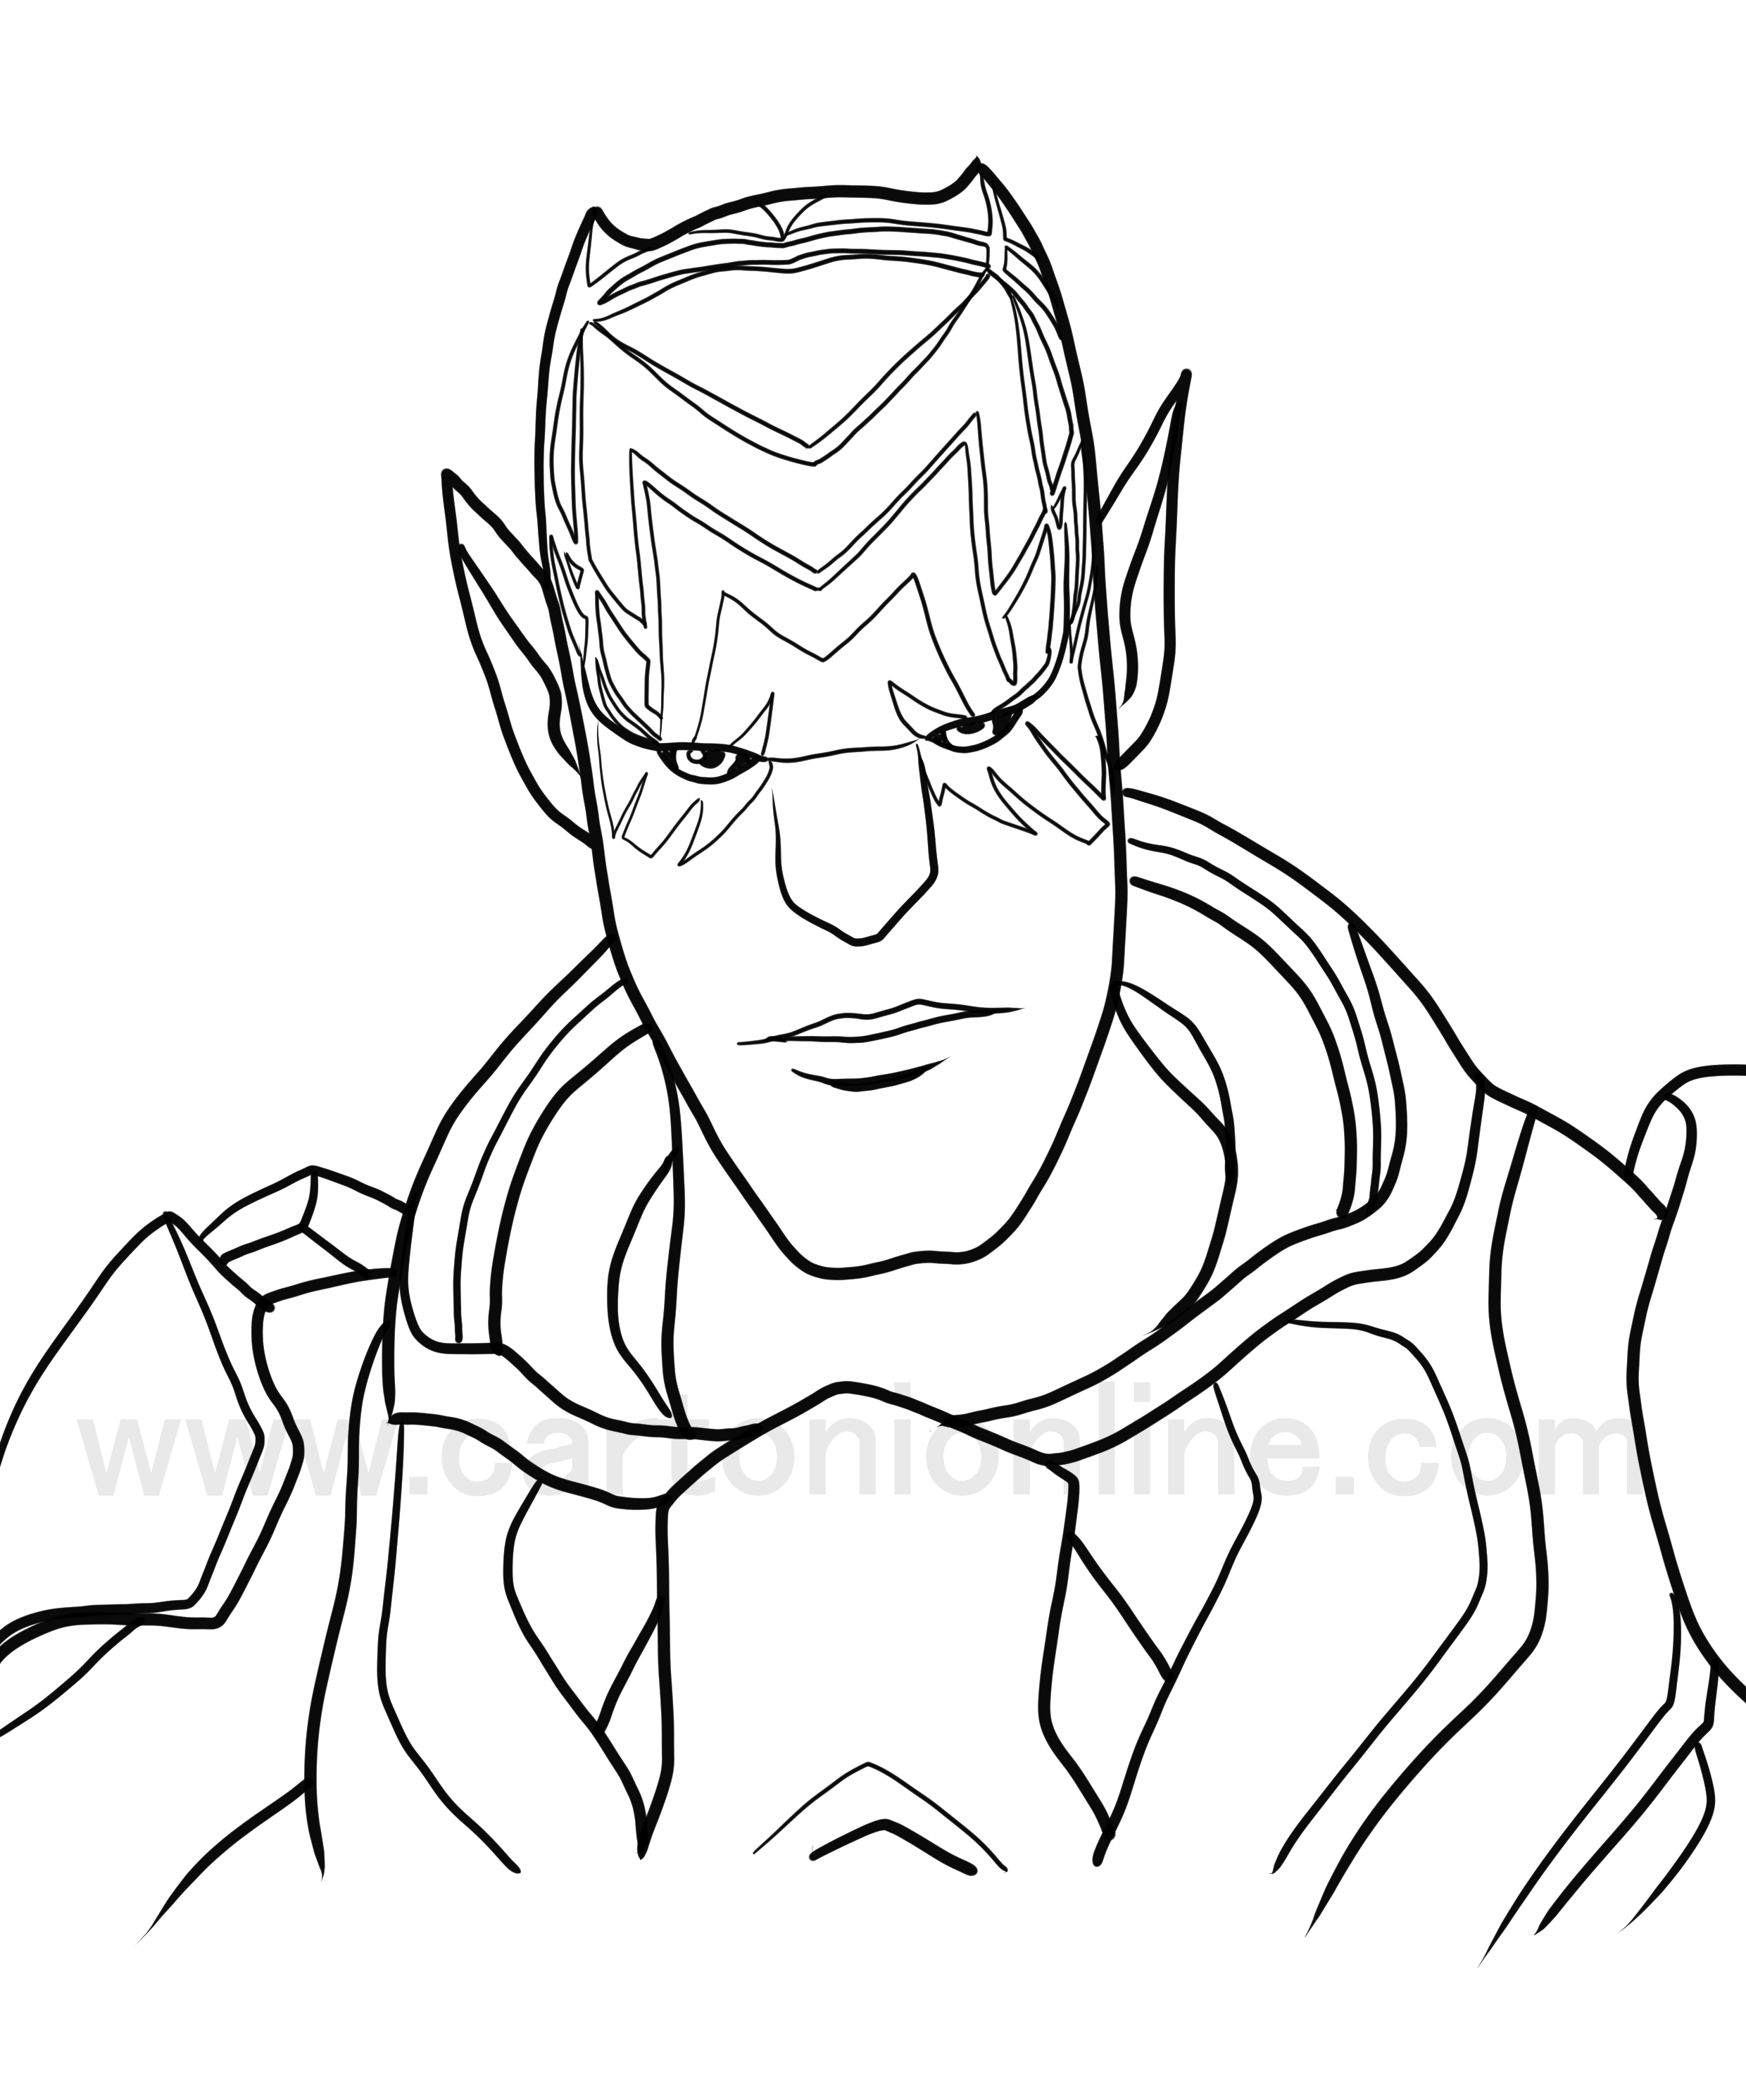 Kymera from Fortnite coloring page to print and coloring